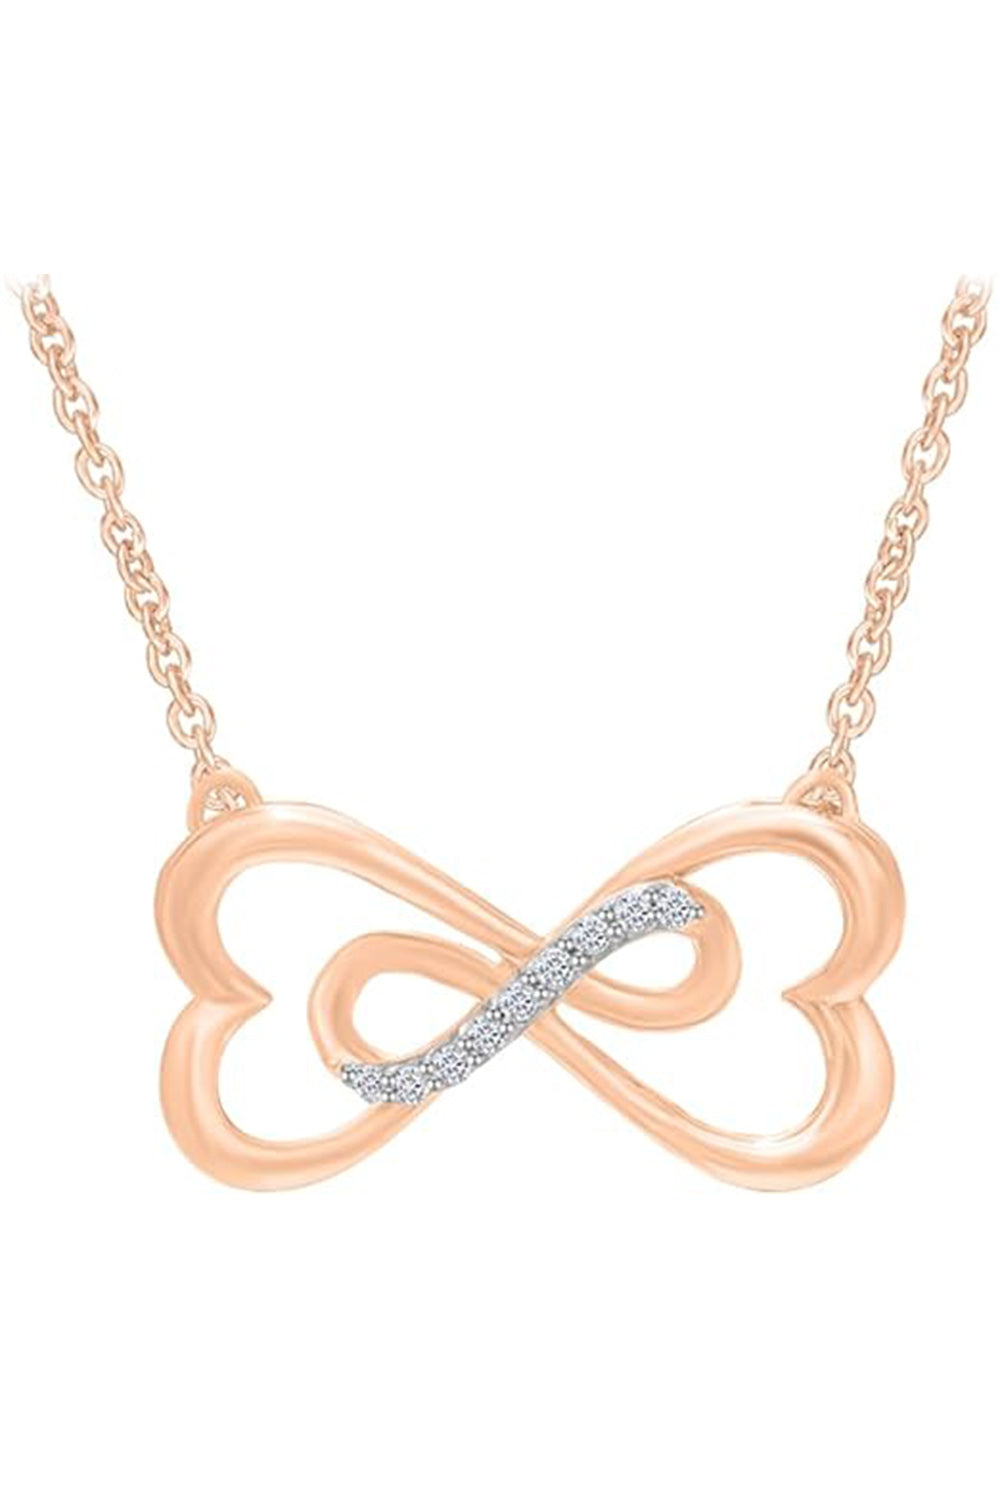 Rose Gold Color Sideways Heart Shaped Infinity Necklace